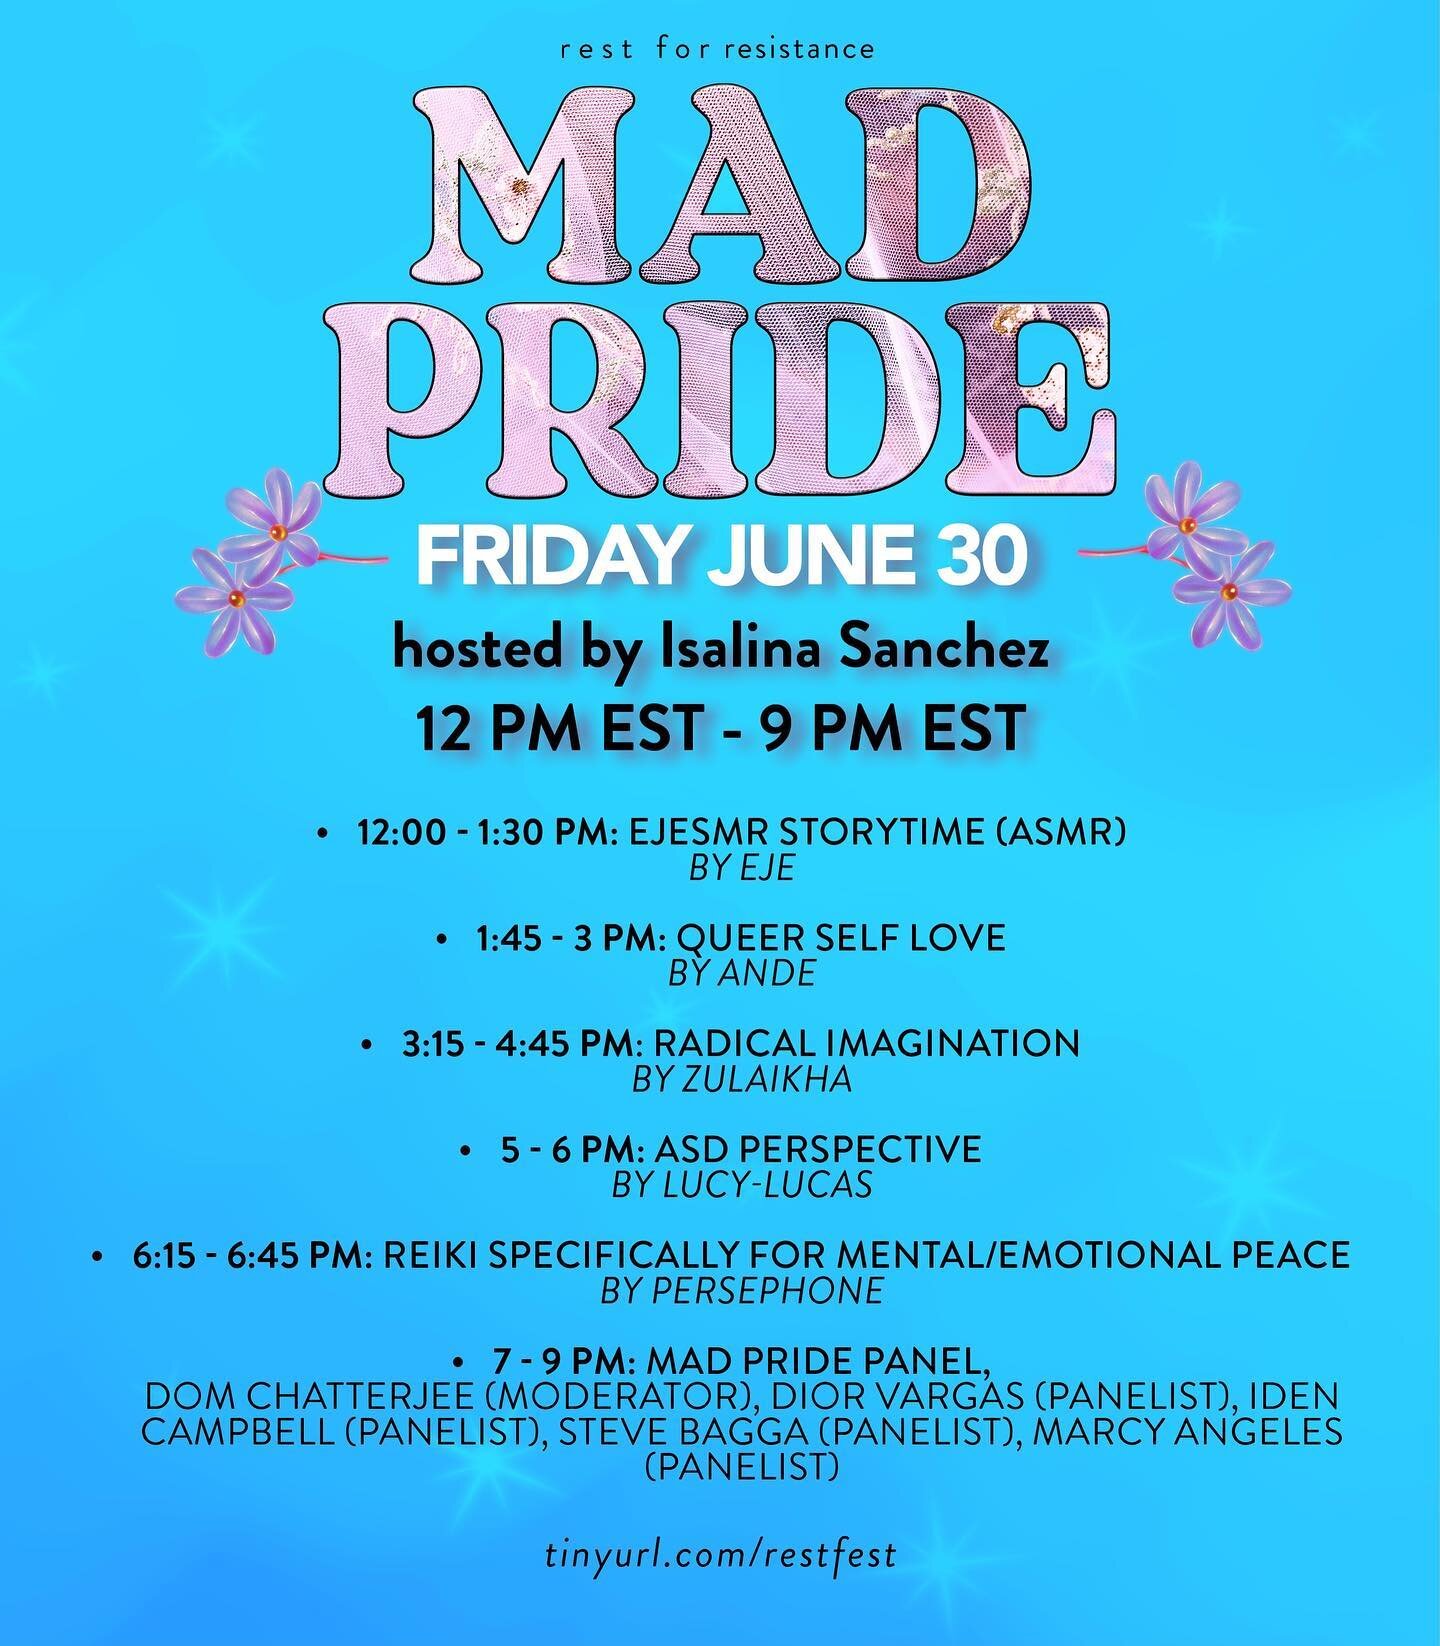 ✨REST FEST is a testimony to those who are left behind ✨!

Tomorrow, REST FEST is honoring the Mad Pride movement, which arose in the 1990s as psychiatric survivors began to push against the harms within the mental health system. Isalina Sanchez will